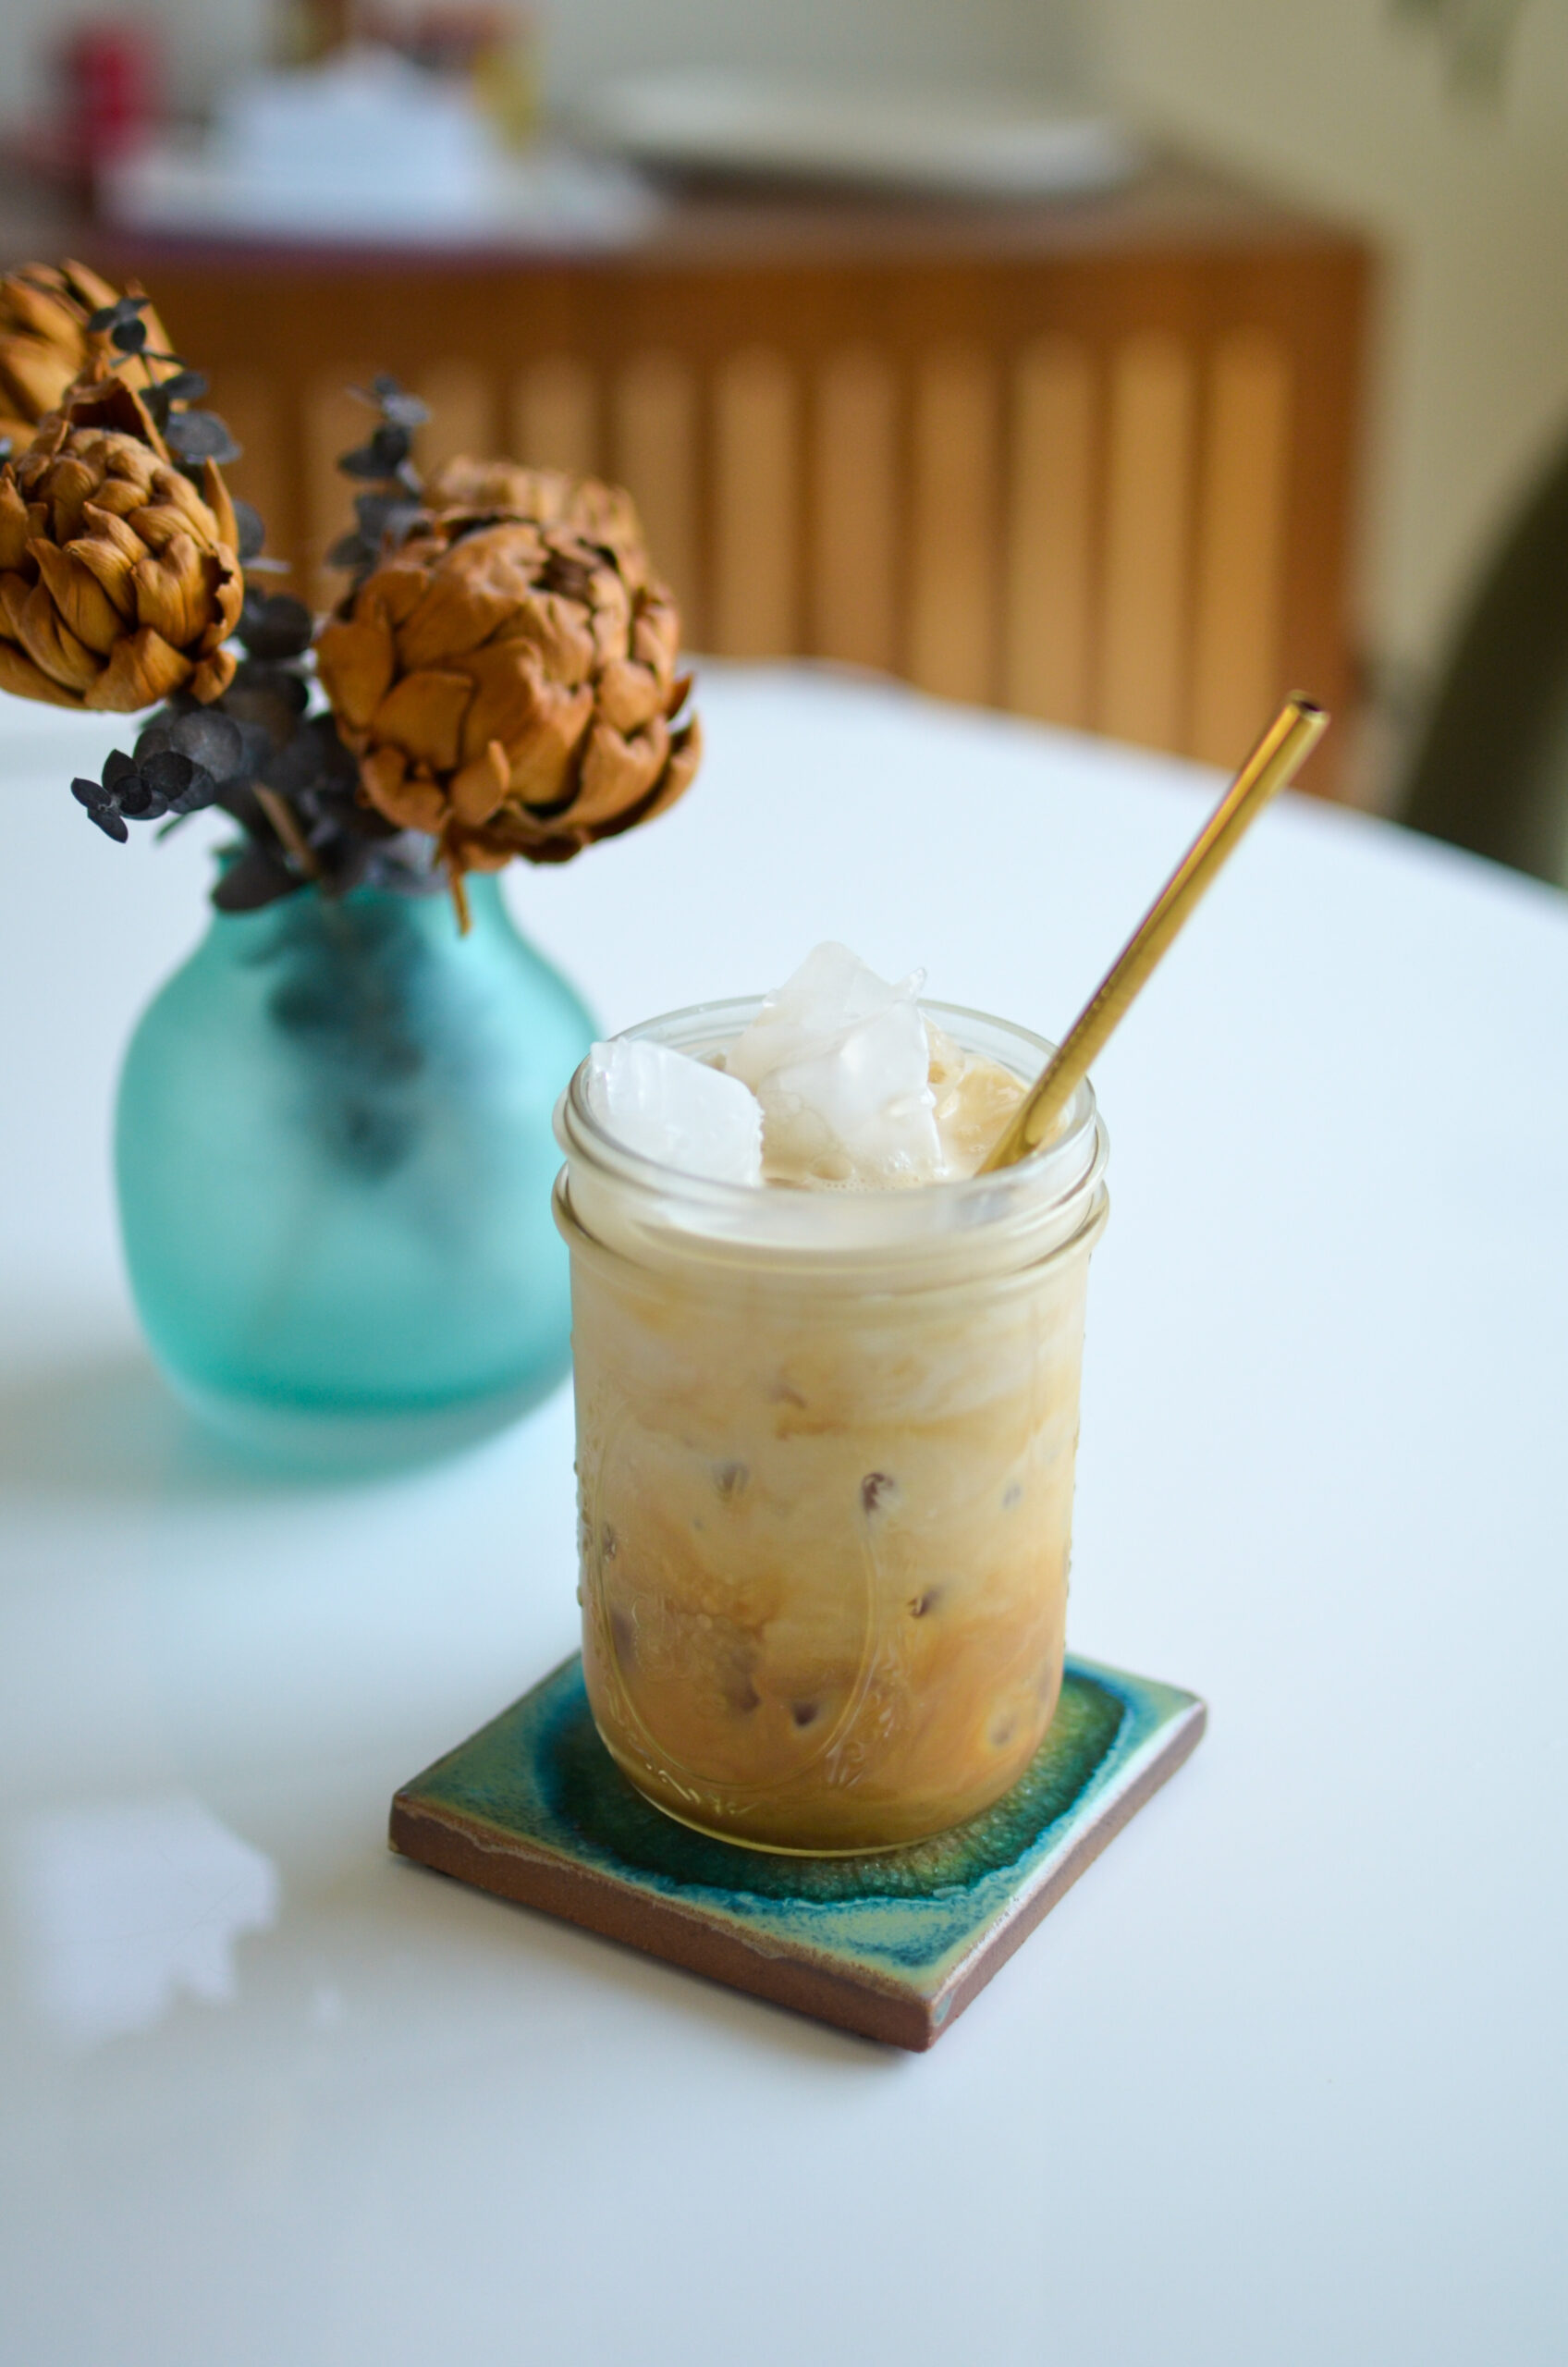 Sip on something sweet to start your morning or an afternoon pick-me-up with our iced brown sugar latte.